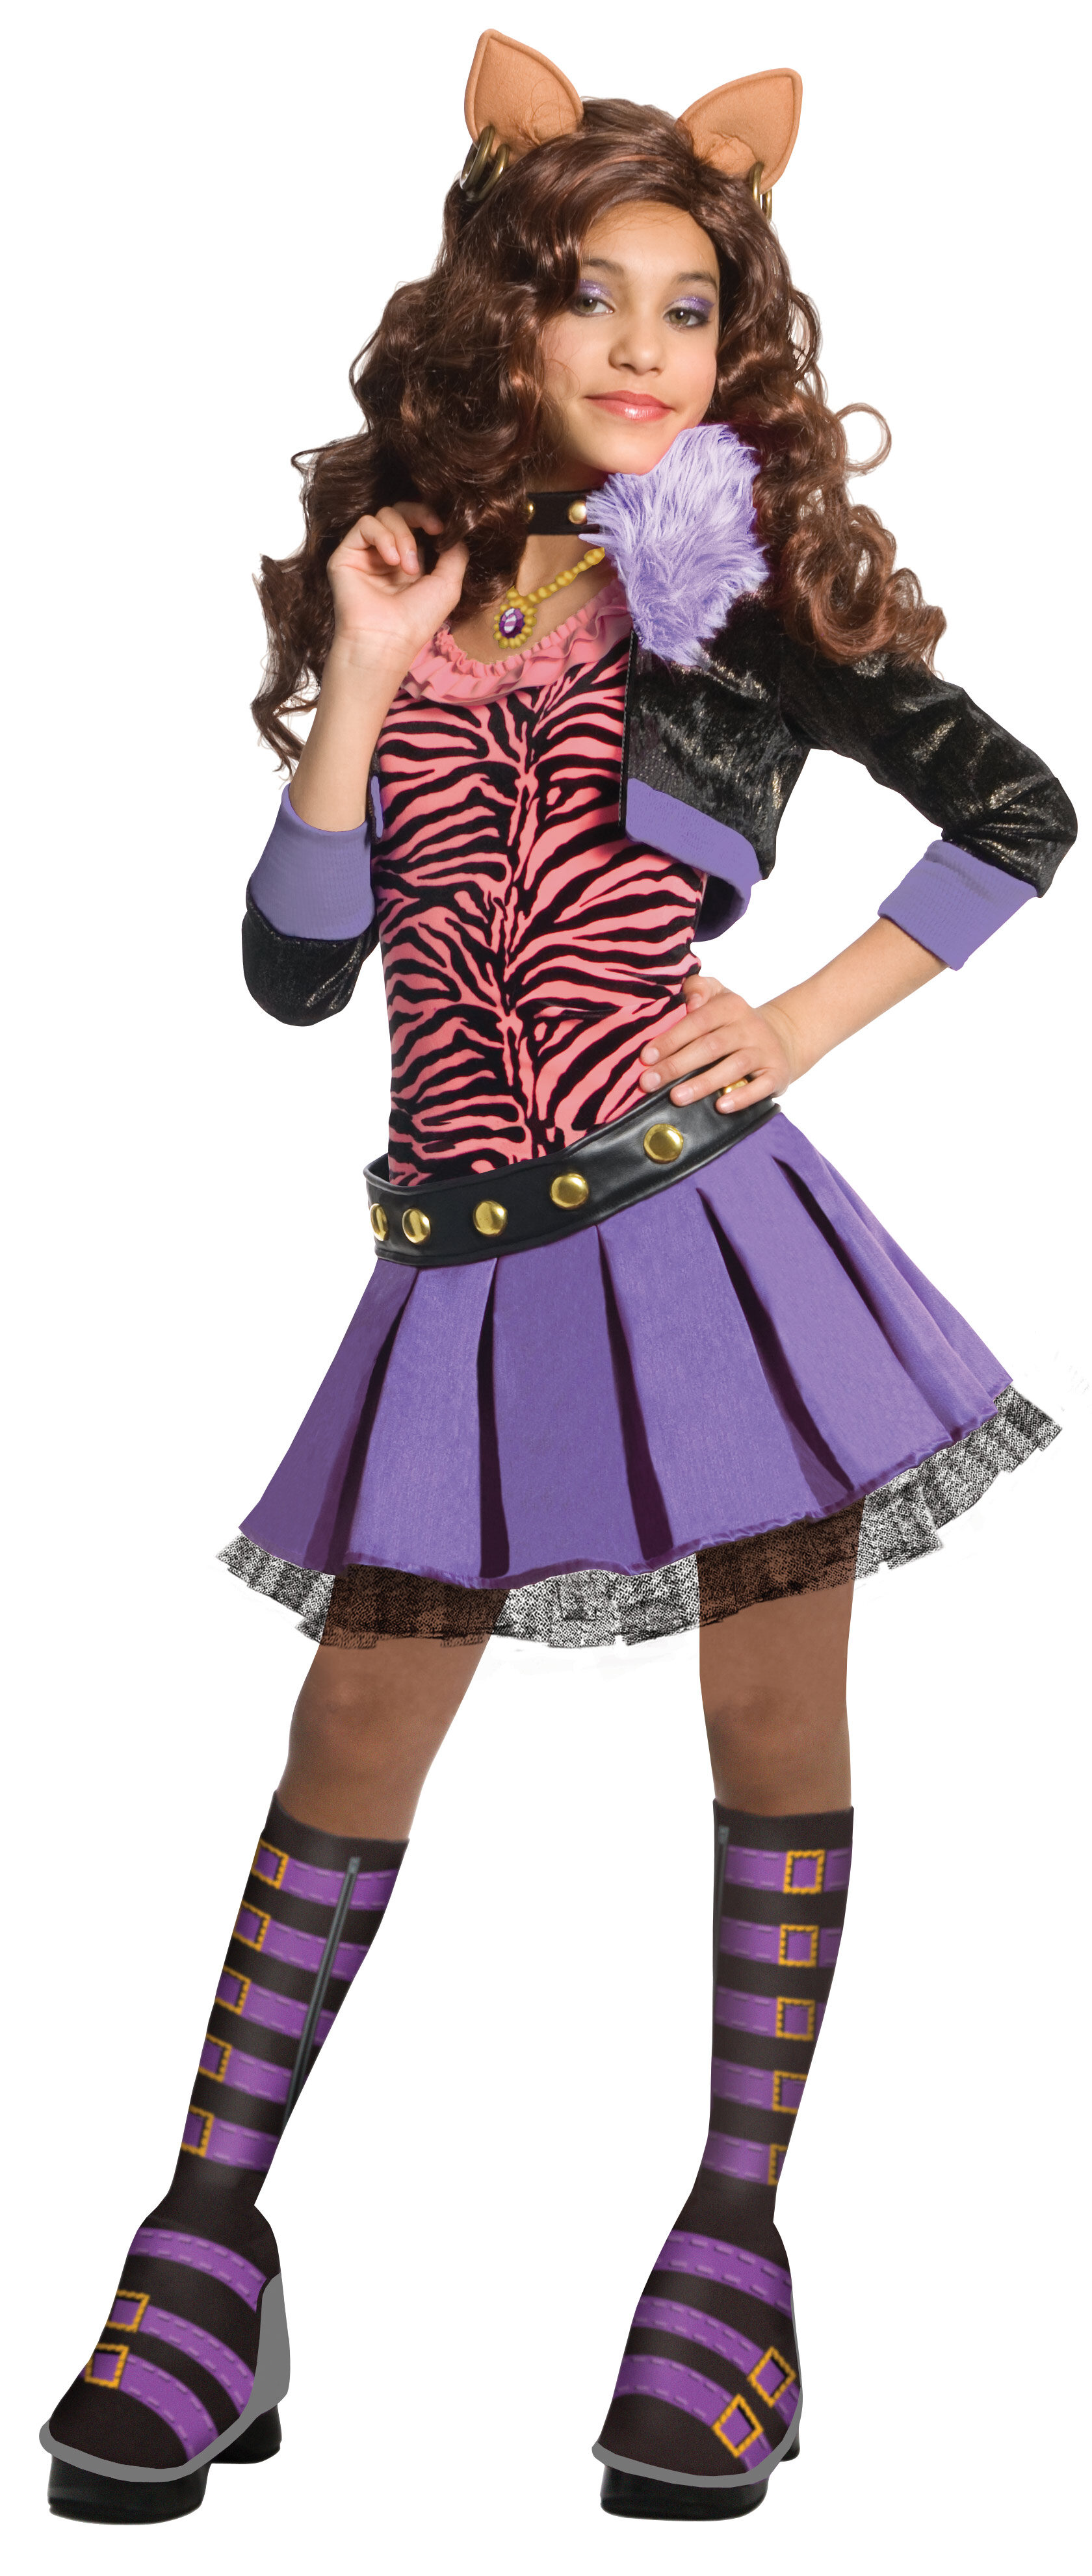 Deluxe Clawdeen Wolf Monster High Kids Costume - Mr. Costumes.